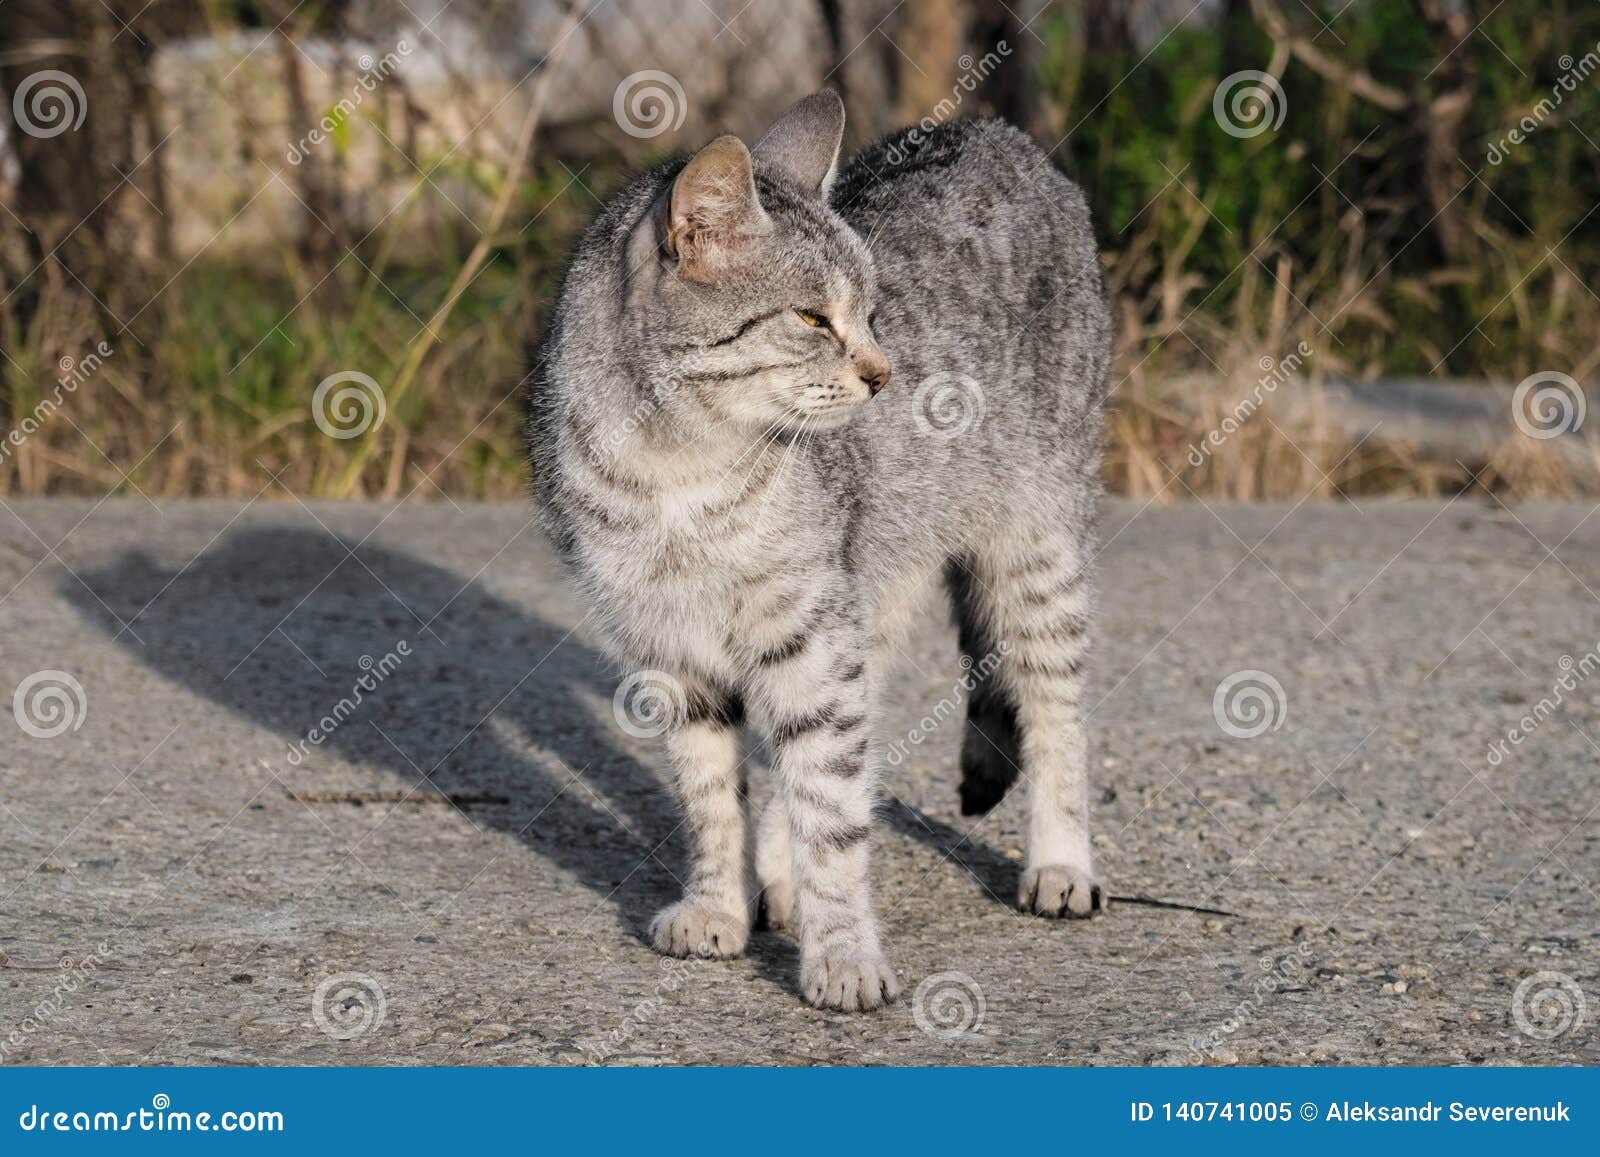 Kitty squints in the sun stock image. Image of closely ...